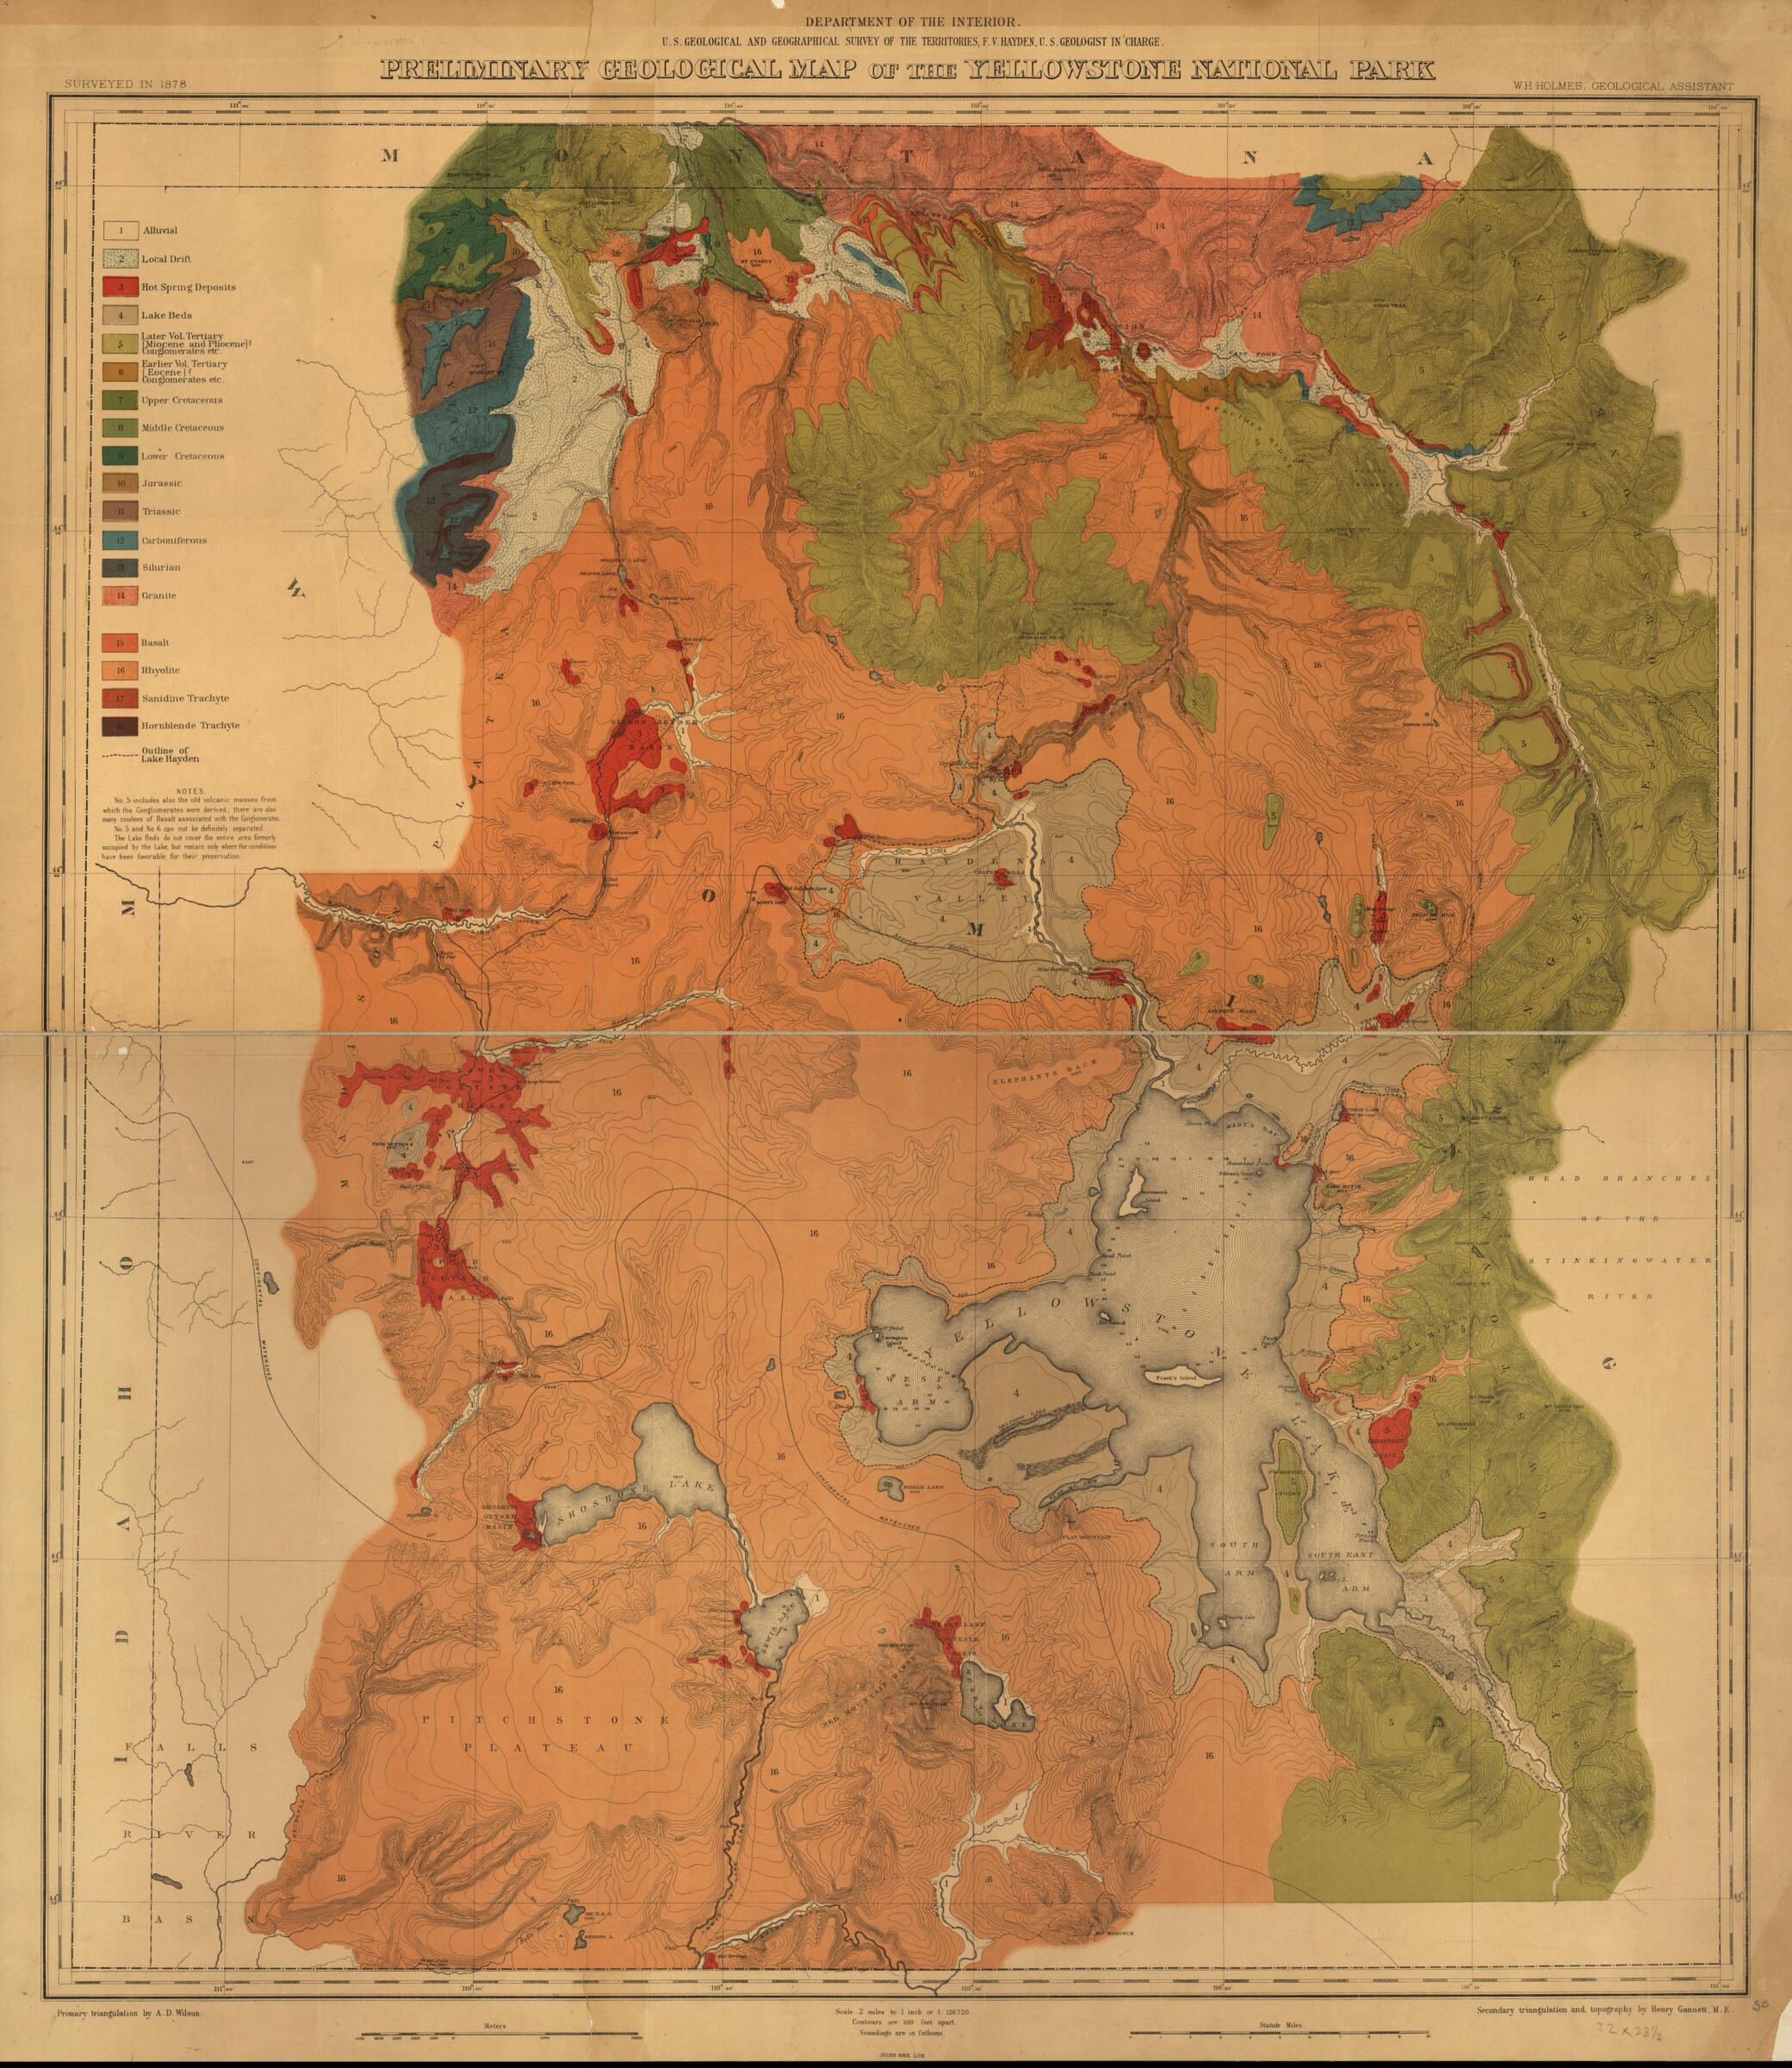 This old map of Preliminary Geological Map of the Yellowstone National Park from 1878 was created by  Geological and Geographical Survey of the Territories (U.S.), F. V. (Ferdinand Vandeveer) Hayden in 1878